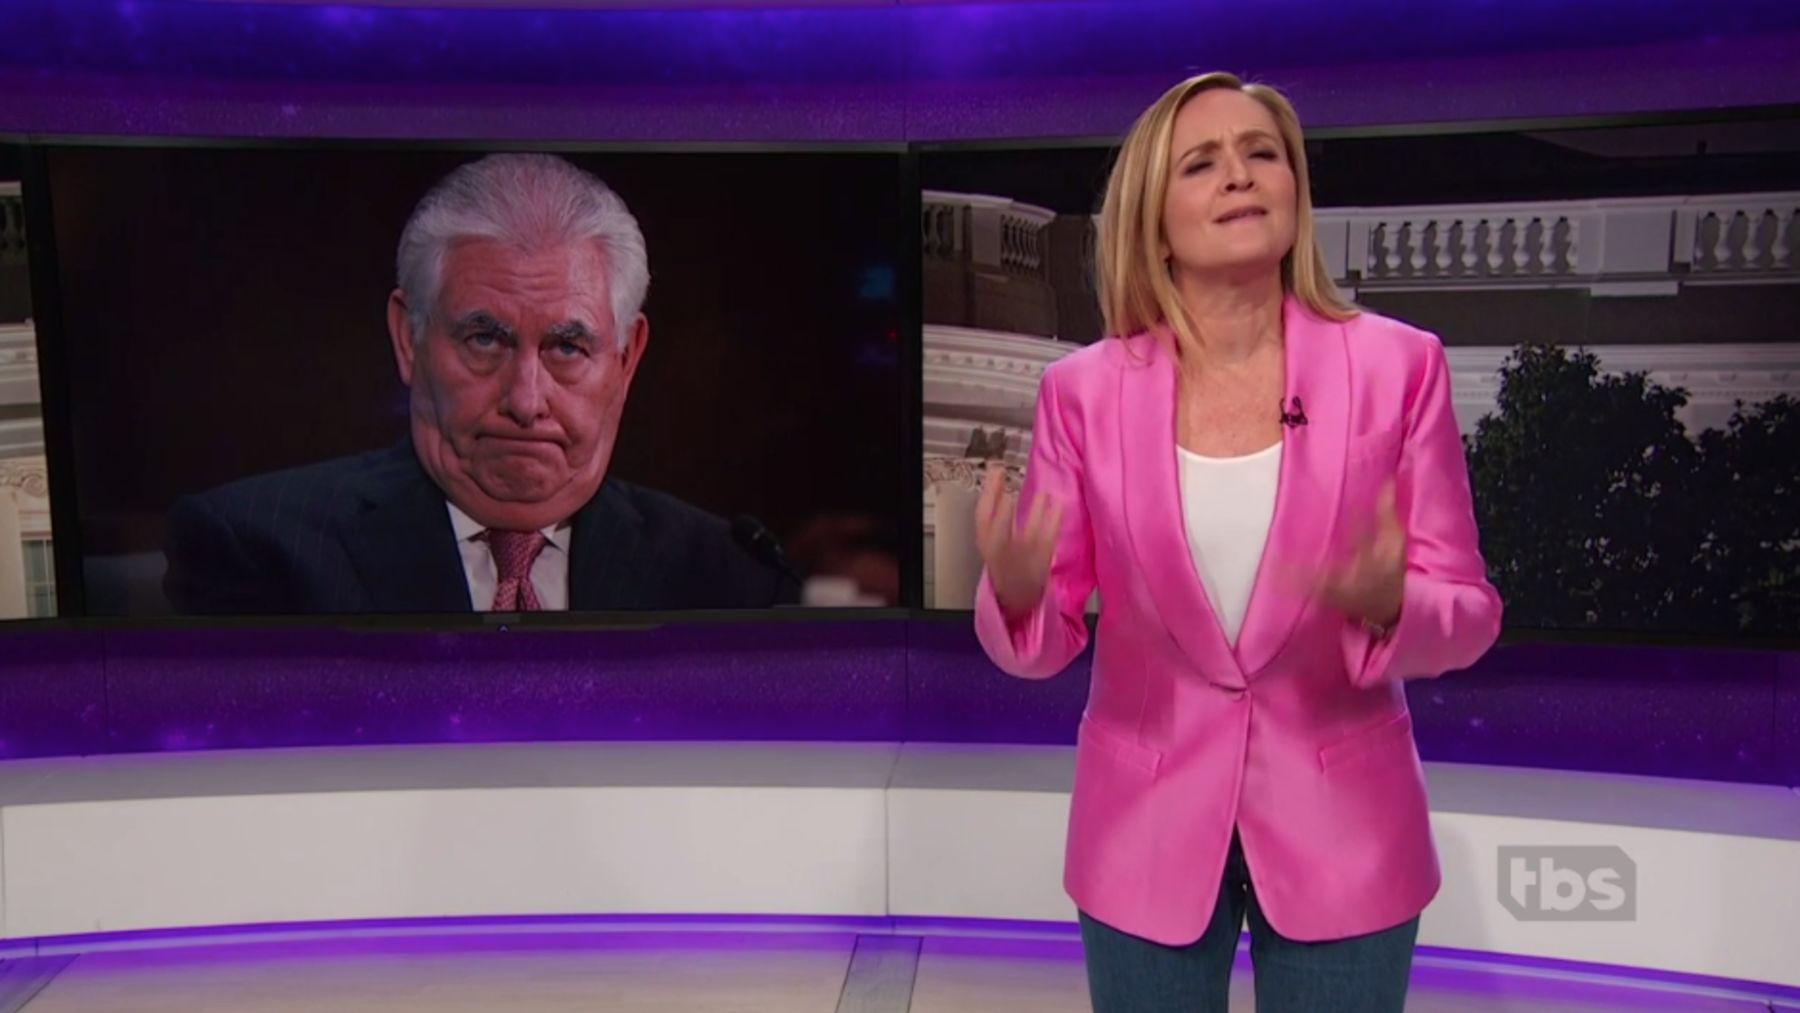 Full Frontal with Samantha Bee S3E3 March 14, 2018